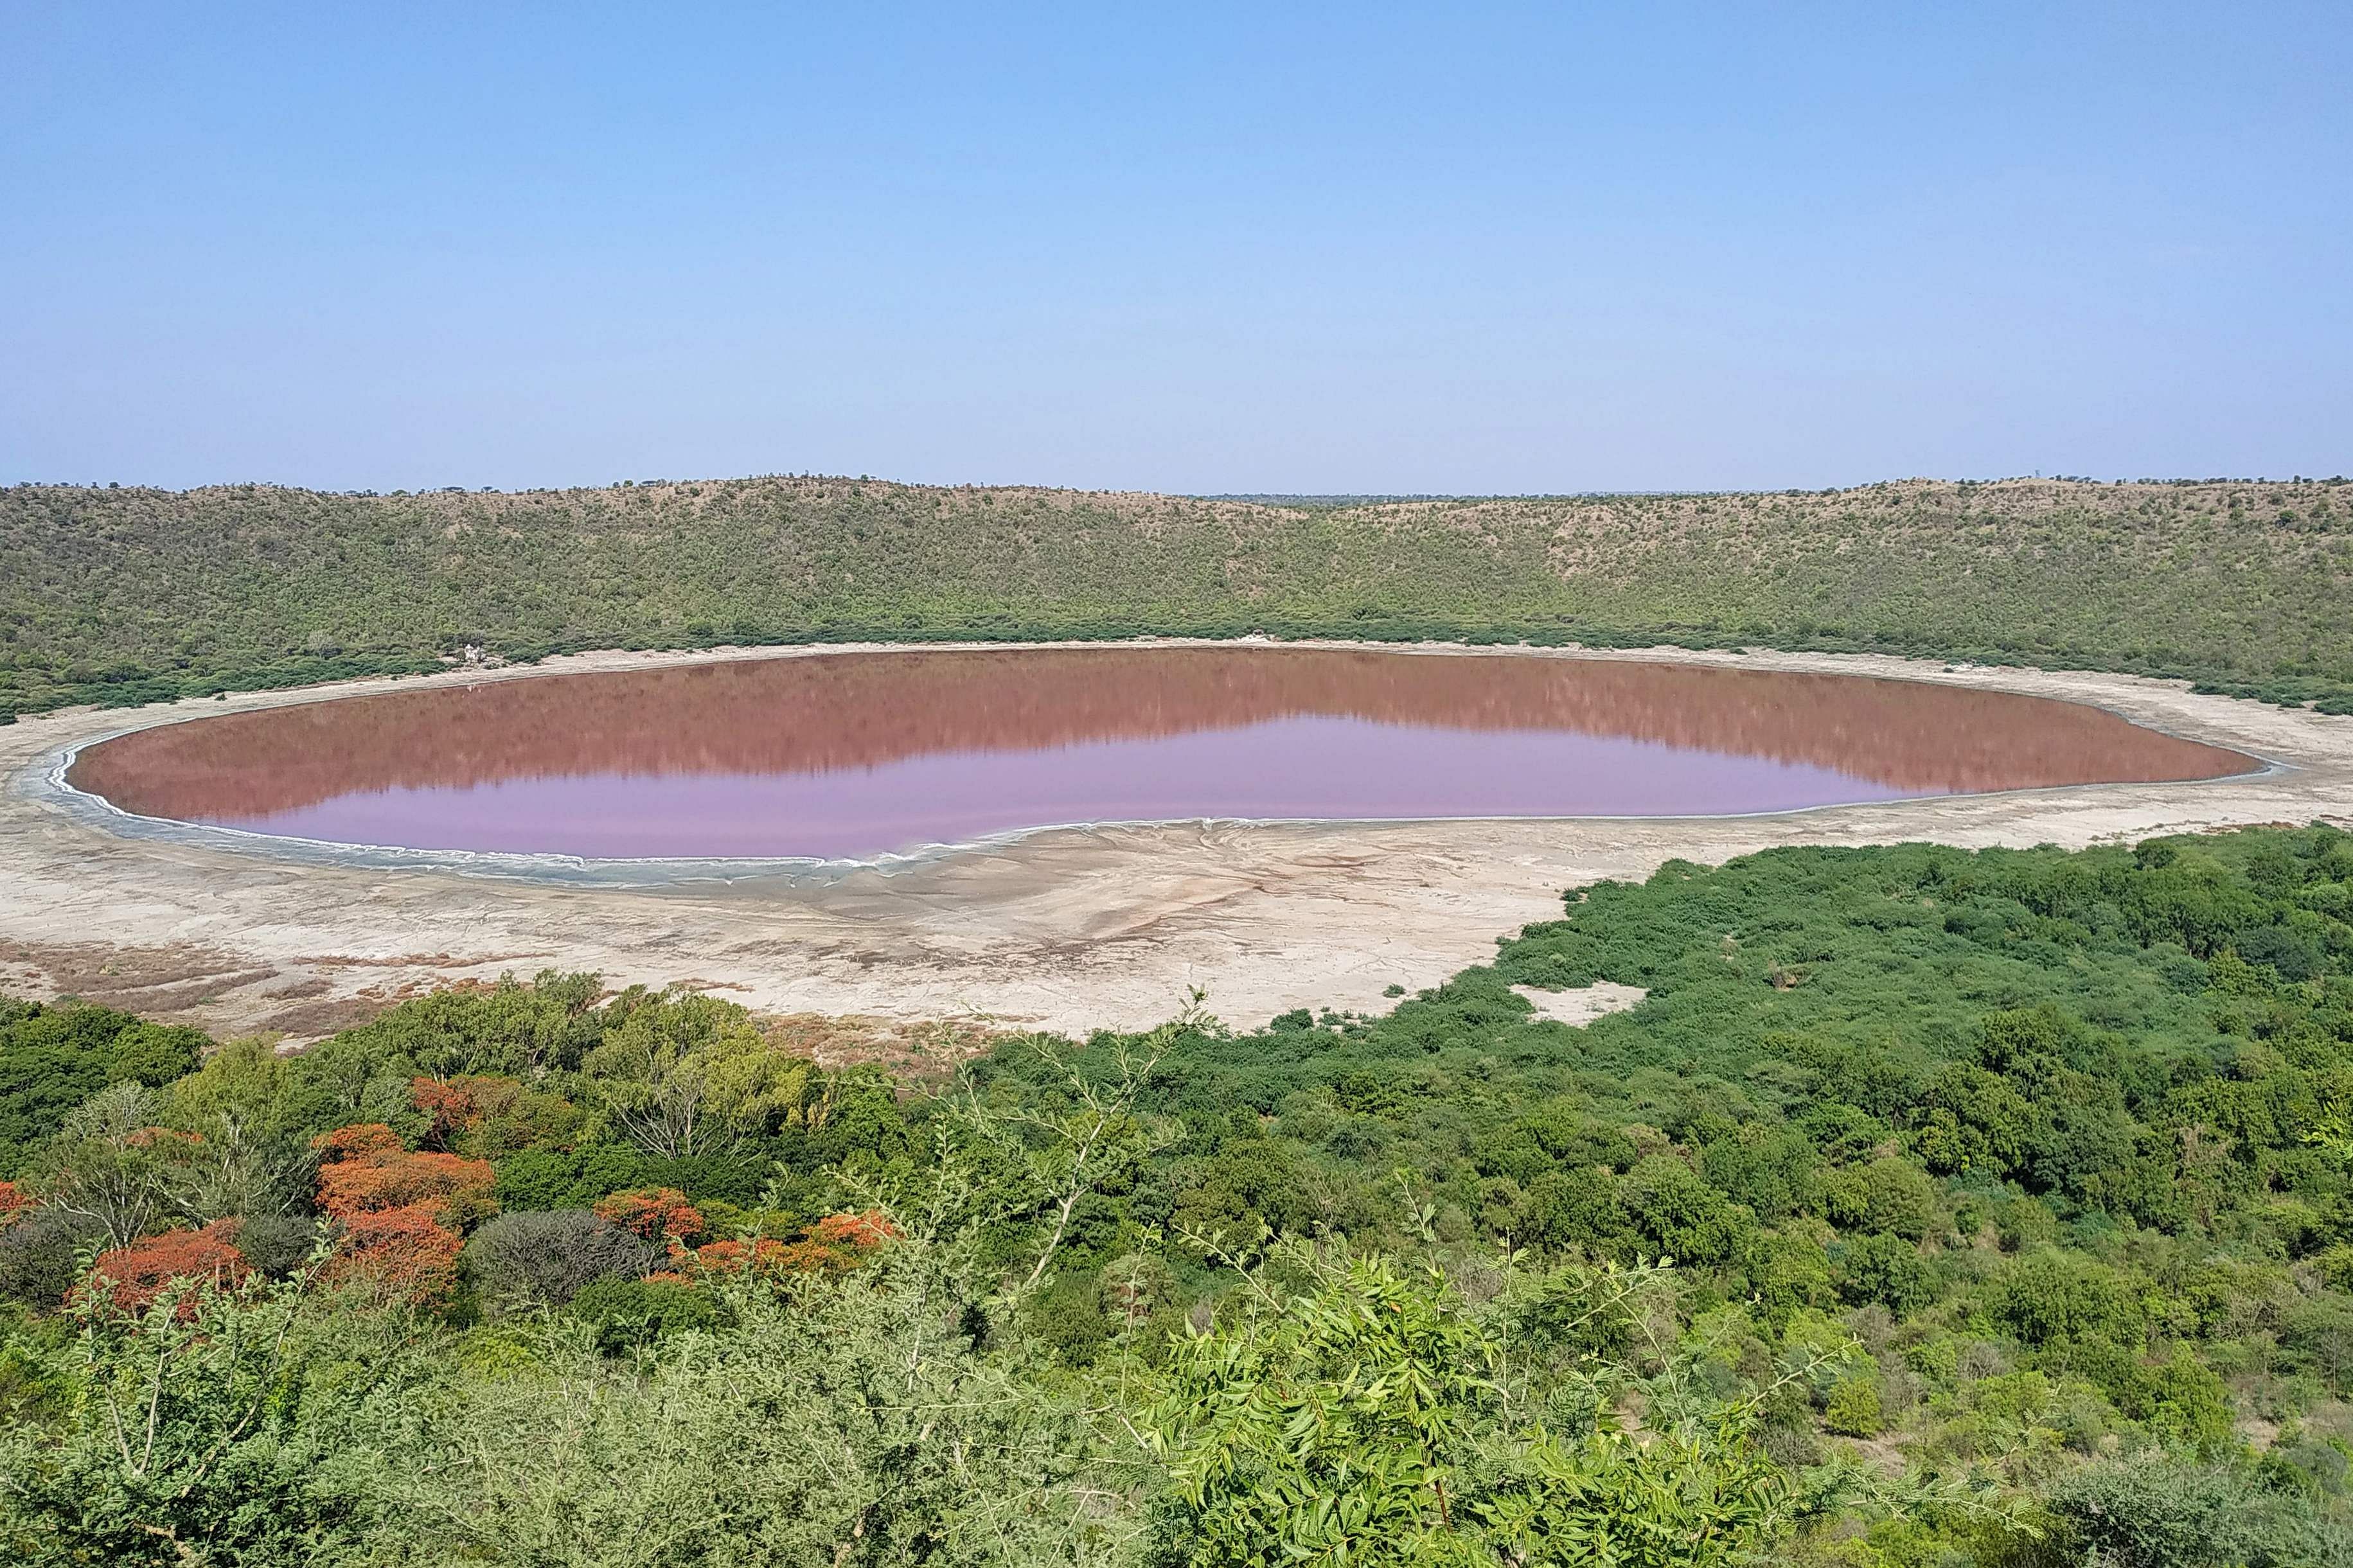 A general view of Lonar crater sanctuary lake is pictured in Buldhana district of Maharashtra. Credit: AFP